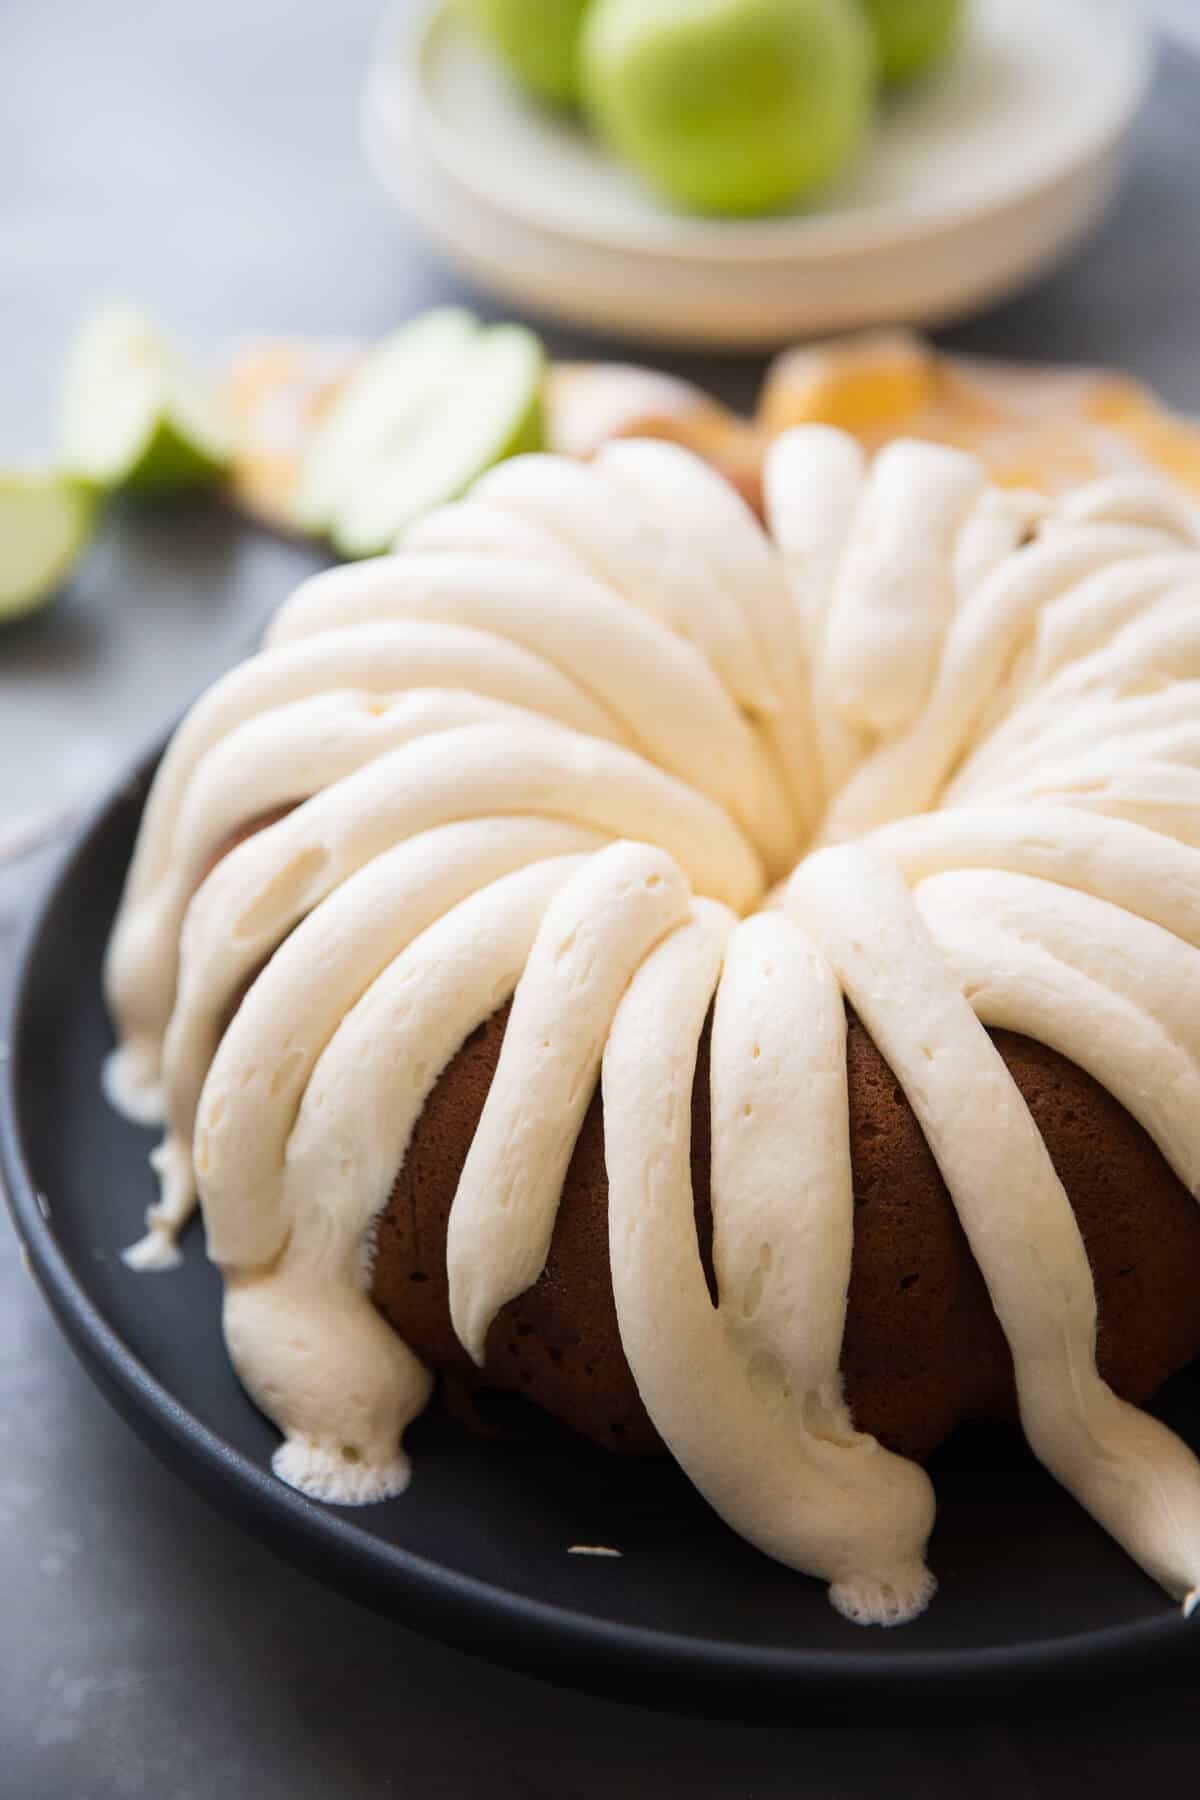 Brown sugar adds a deeper flavor to this cake than ordinary sugar.   Brown sugar the compliments baked into this easy apple bundt cake!